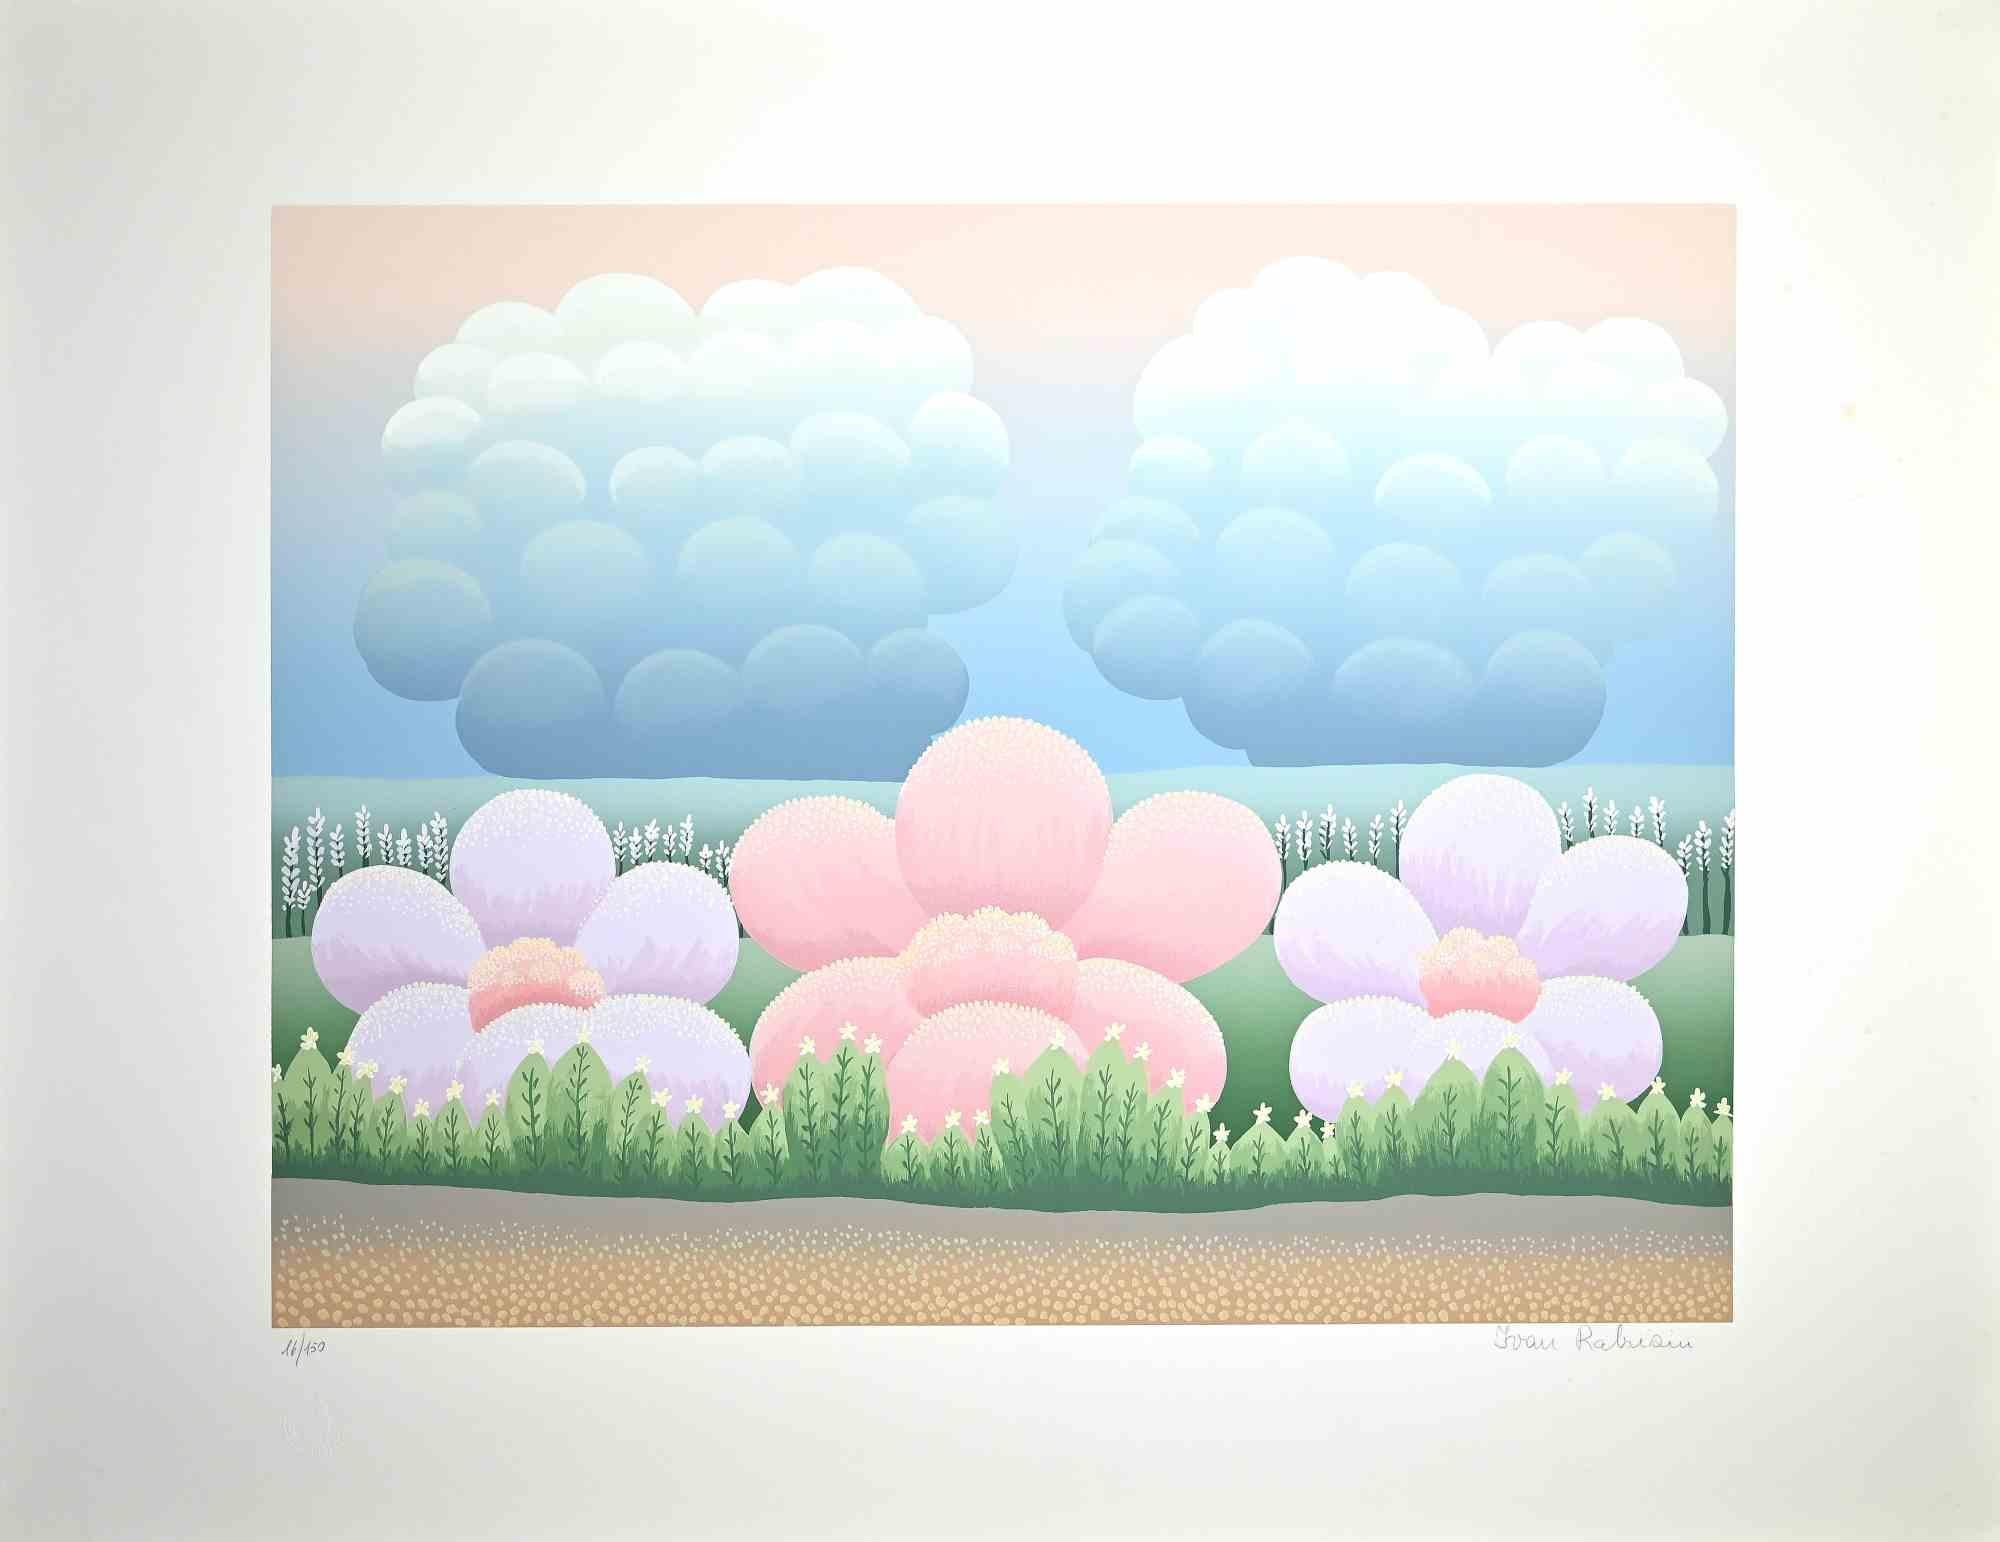 Three Big Flowers is an original colored screen print on paper realized by Ivan Rabuzin in the 1990s.

Hand-signed in pencil on the lower margin.  Edition 16/150

Excellent conditions. 

This very fine print, representing three Big flowers rising